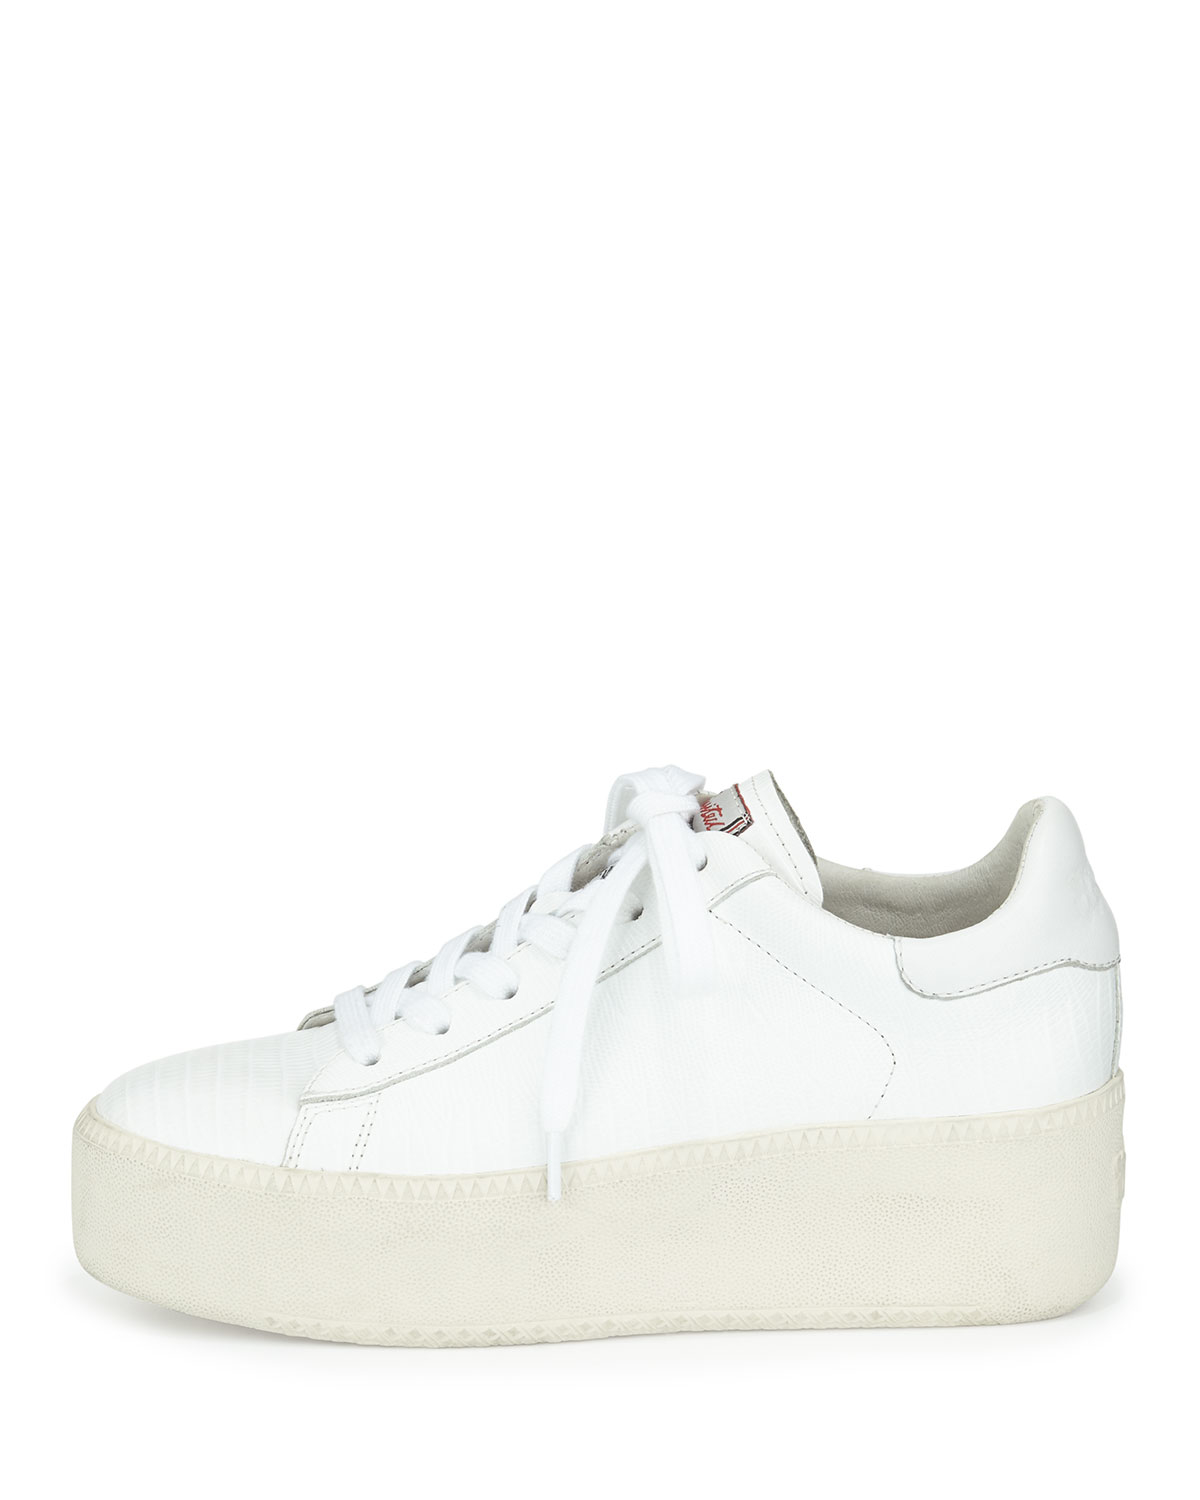 Ash Cult Platform Leather Sneaker in White | Lyst